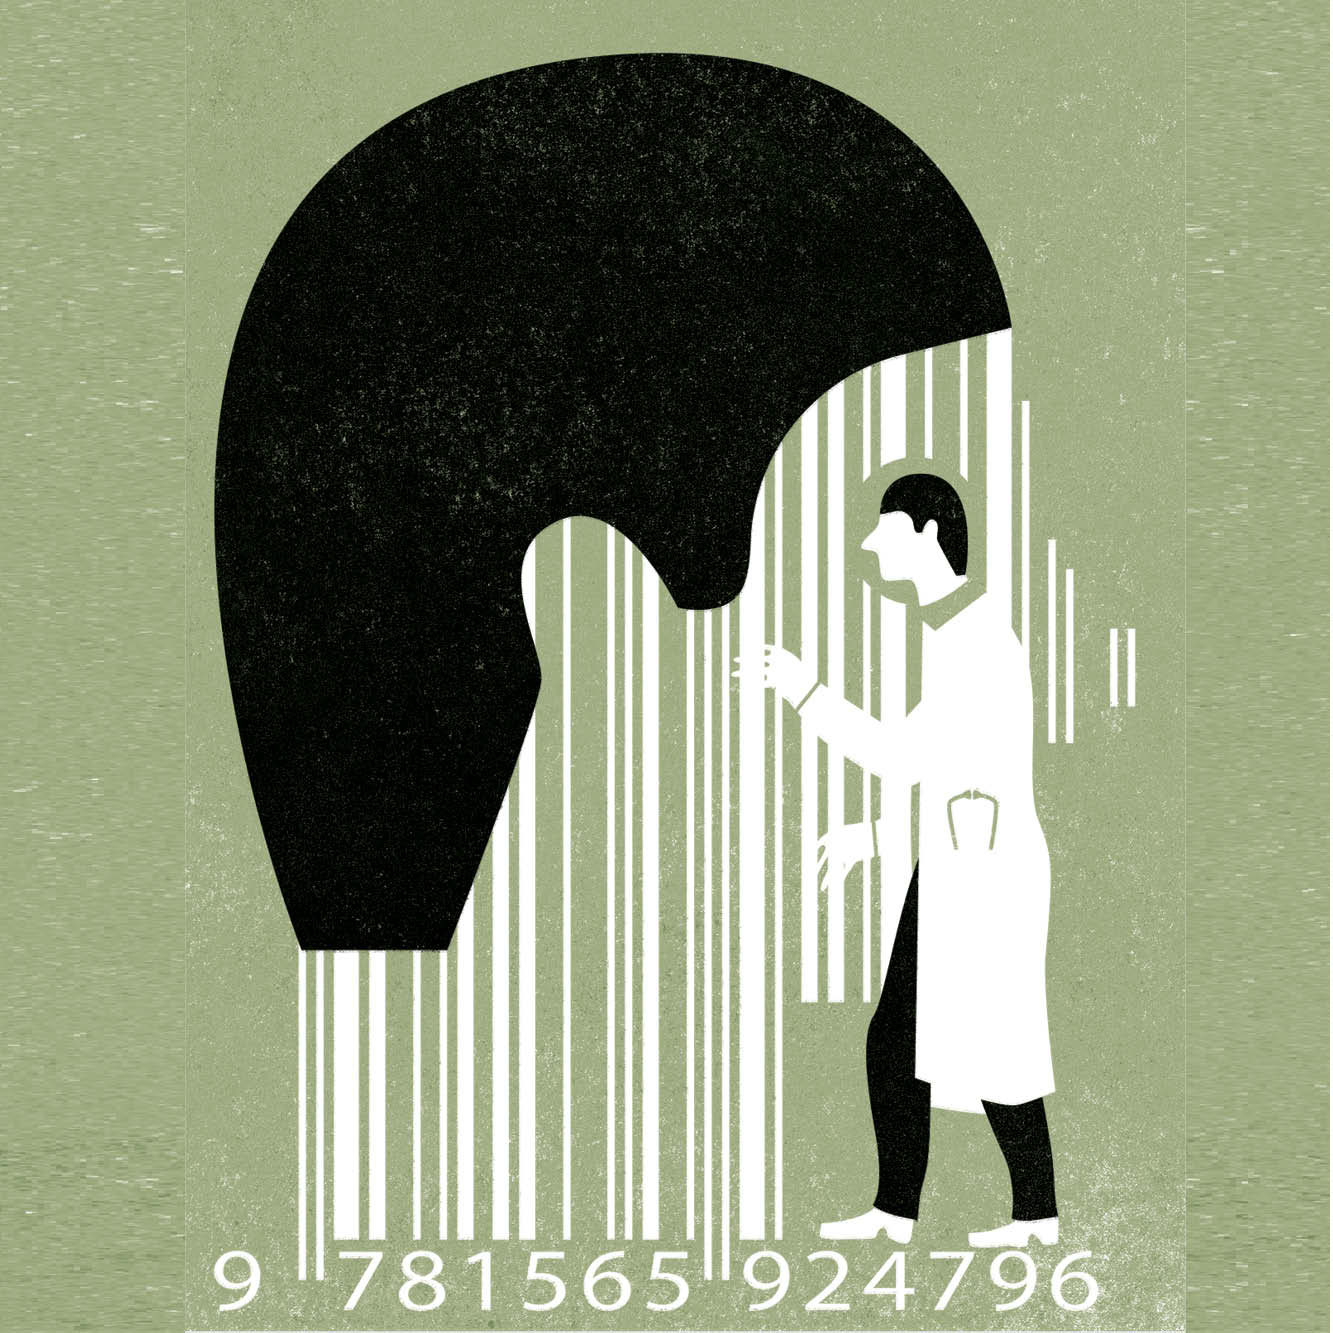 Illustration of brain anomalies rendered with bar code-like data identification numbers.